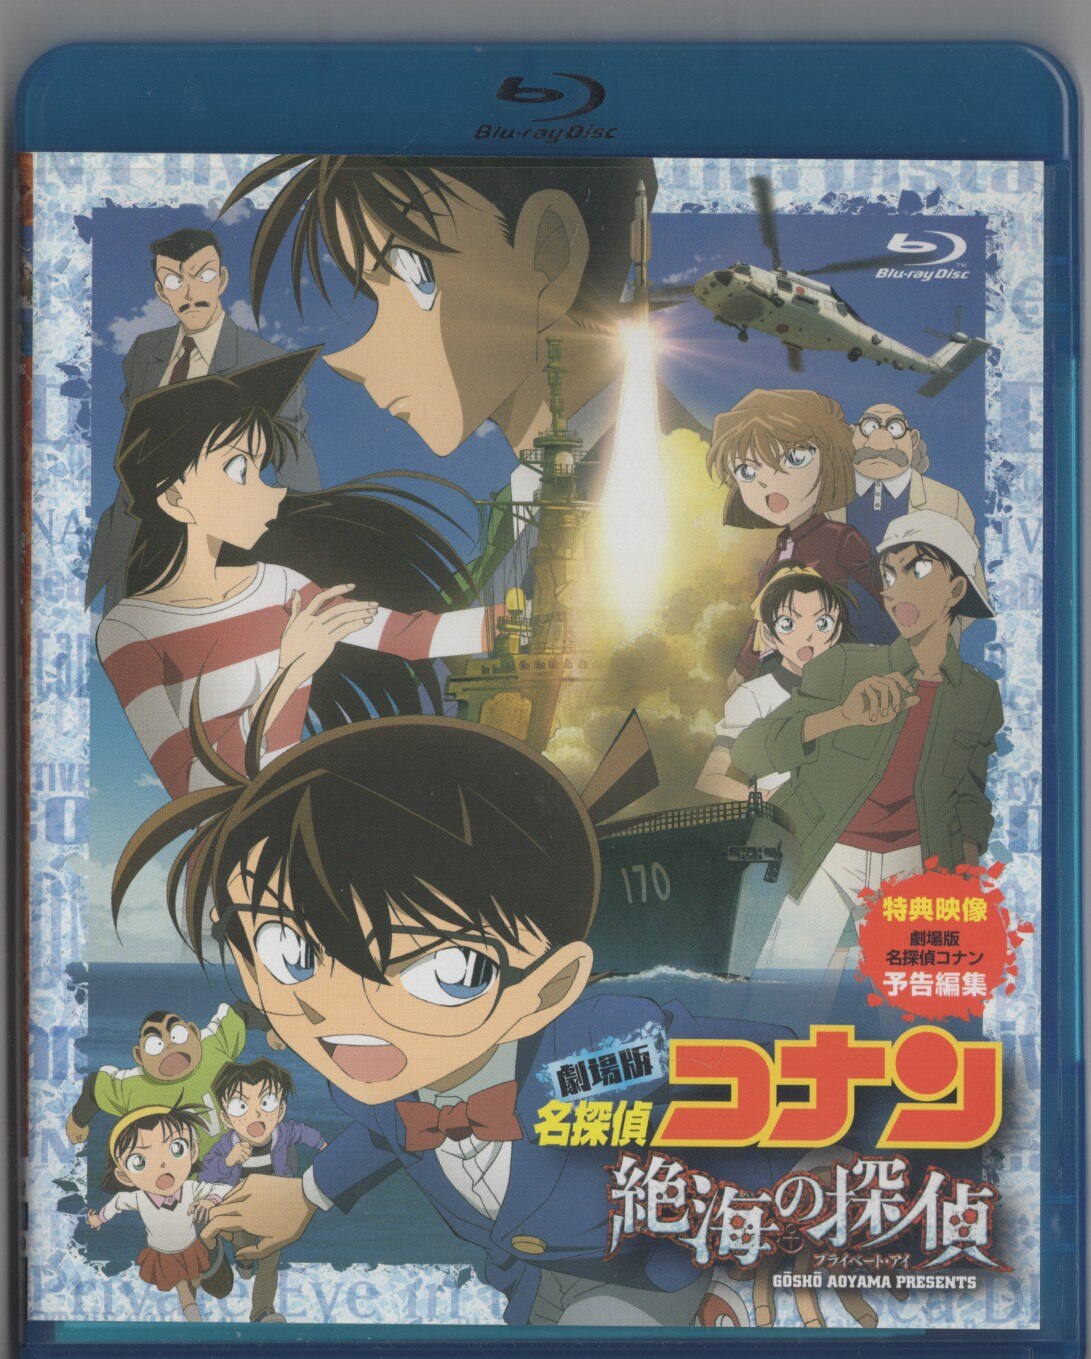 Unruly - The Case Closed anime series, known as Meitantei Conan (名探偵コナン,  lit. Great Detective Conan, officially translated as Detective Conan) in  its original release in Japan, is based on the manga